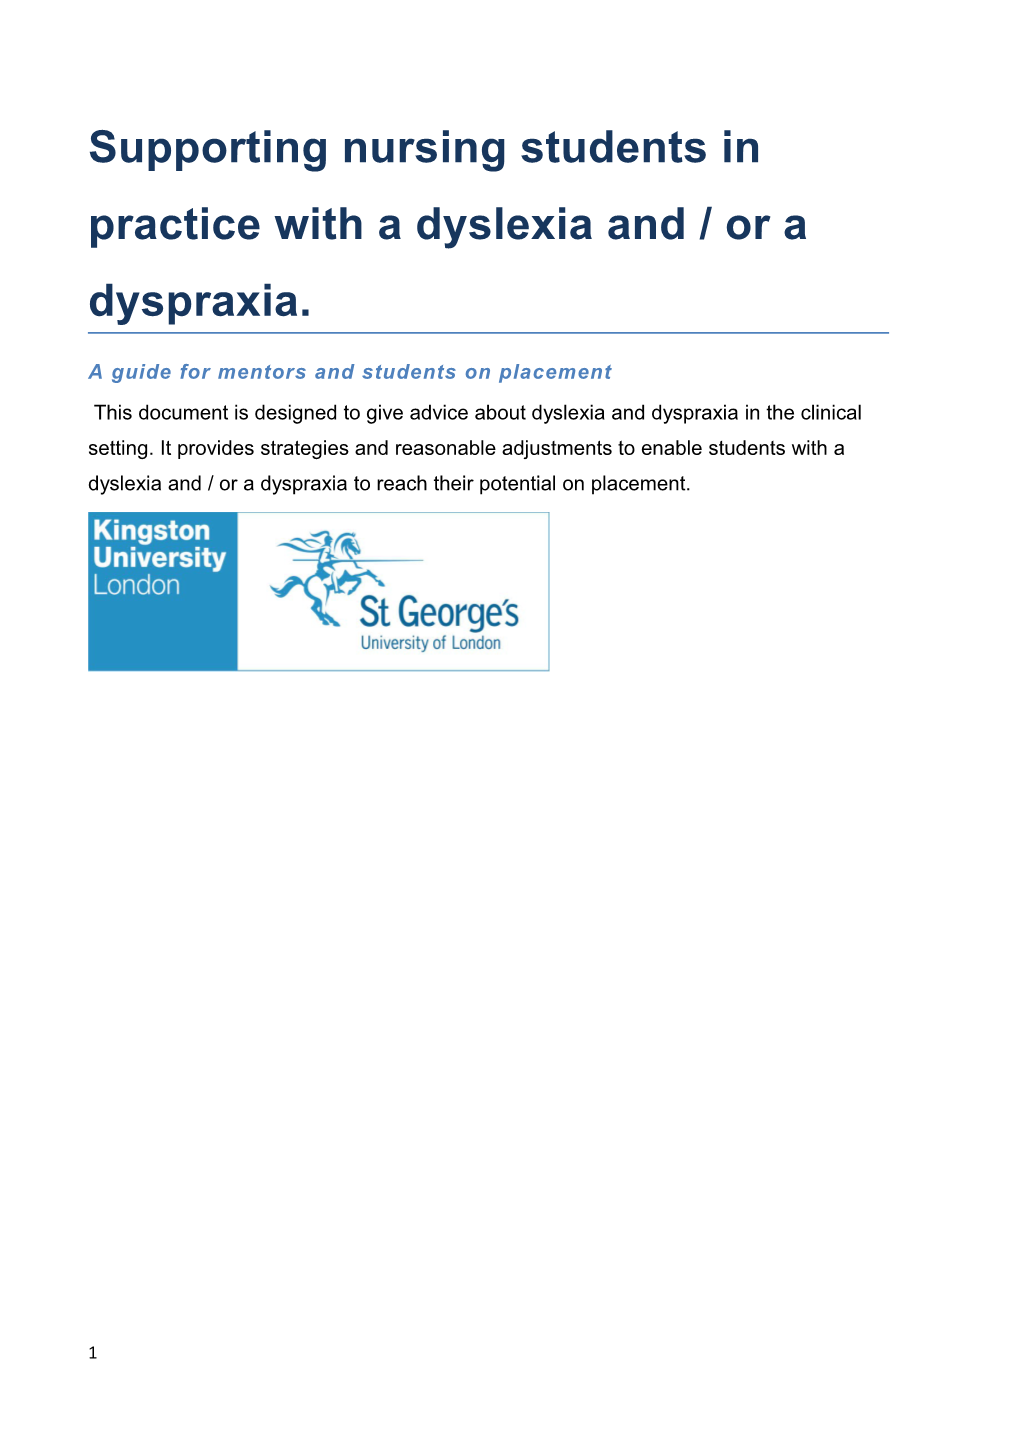 Supporting Nursing Students in Practice with a Dyslexia and / Or a Dyspraxia